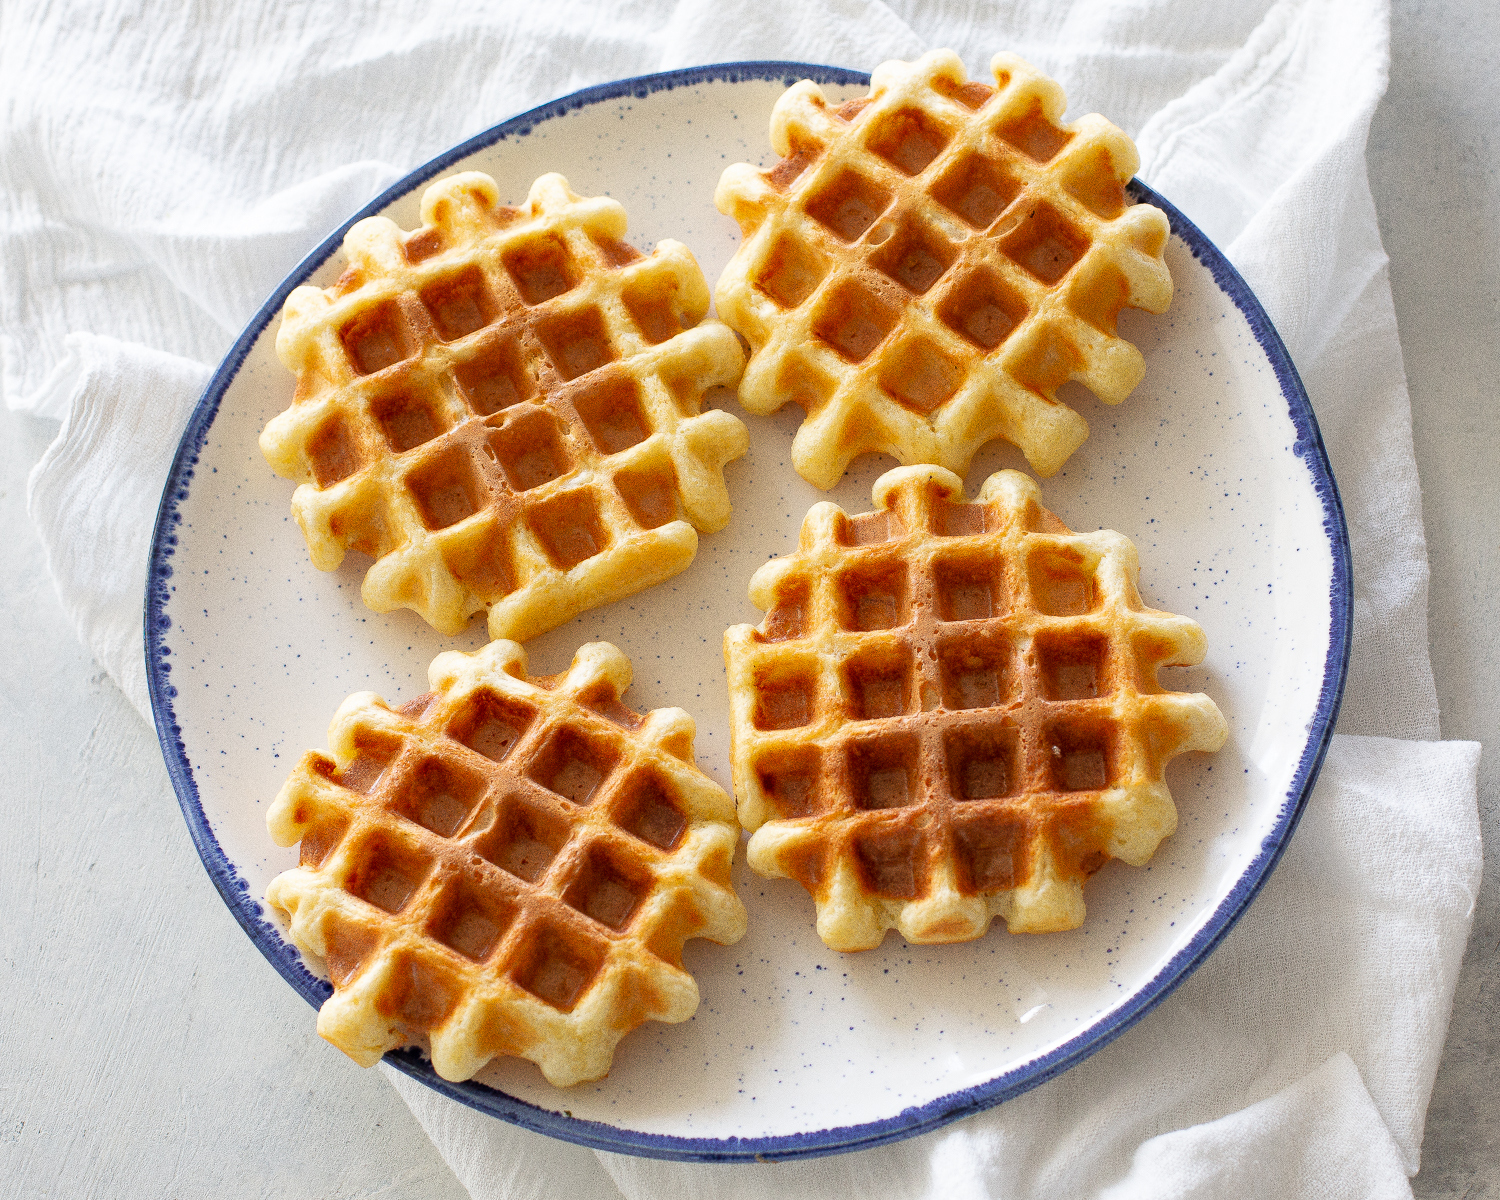 cooked waffles